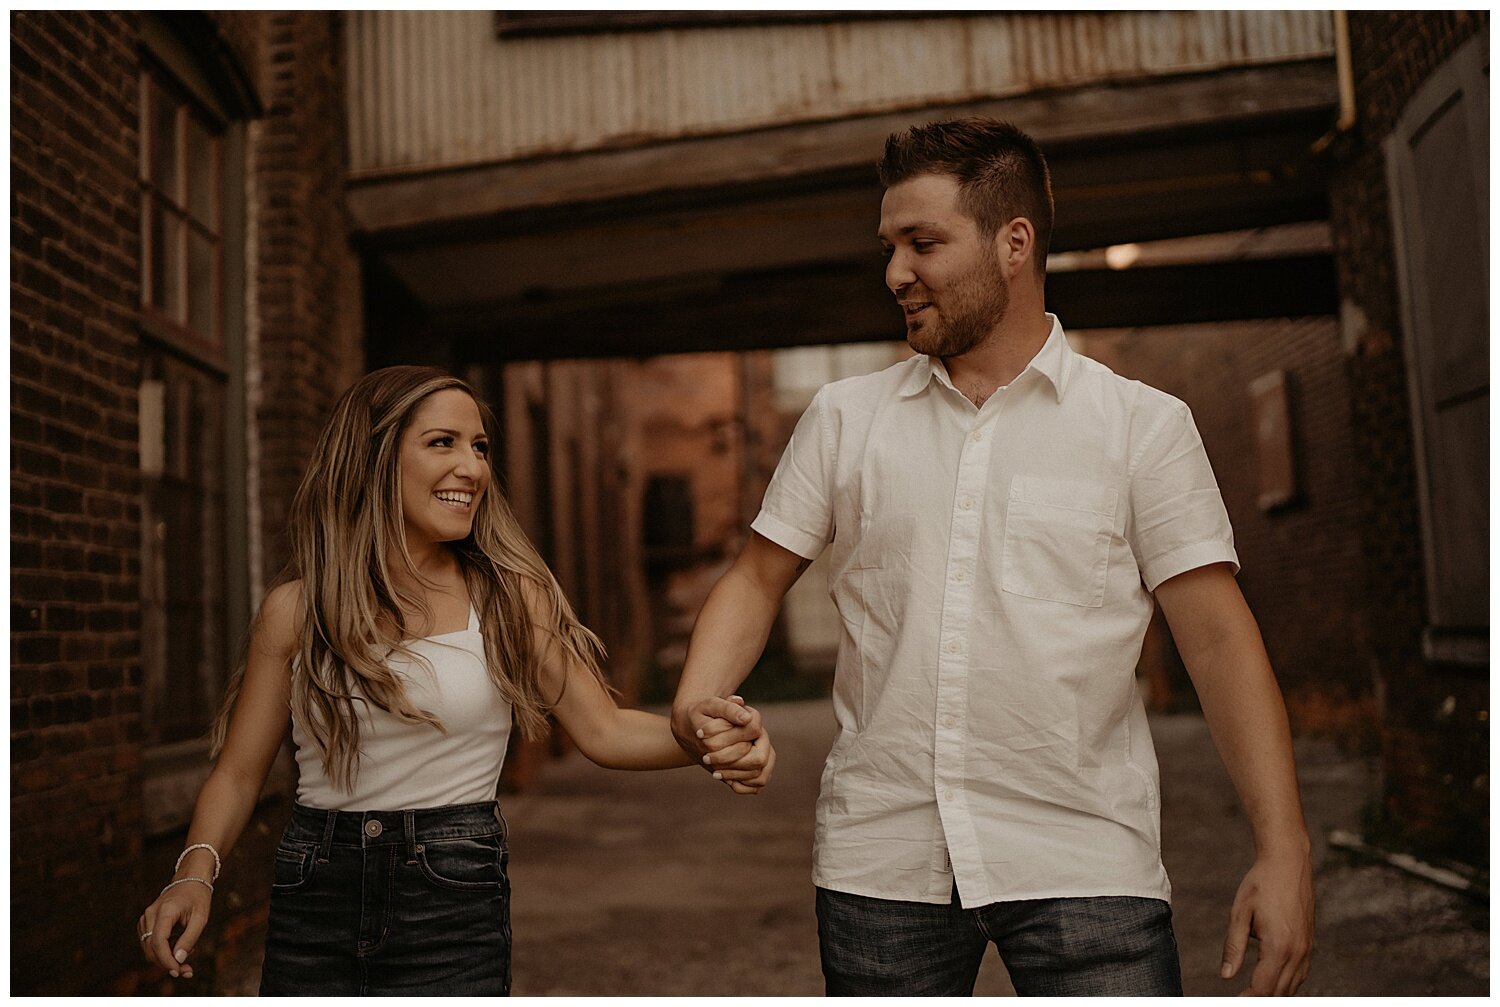 Cotton_Factory_And_Waterfall_Engagement_Session_Hamilton_Ontario_Wedding_Photographer_0027.jpg